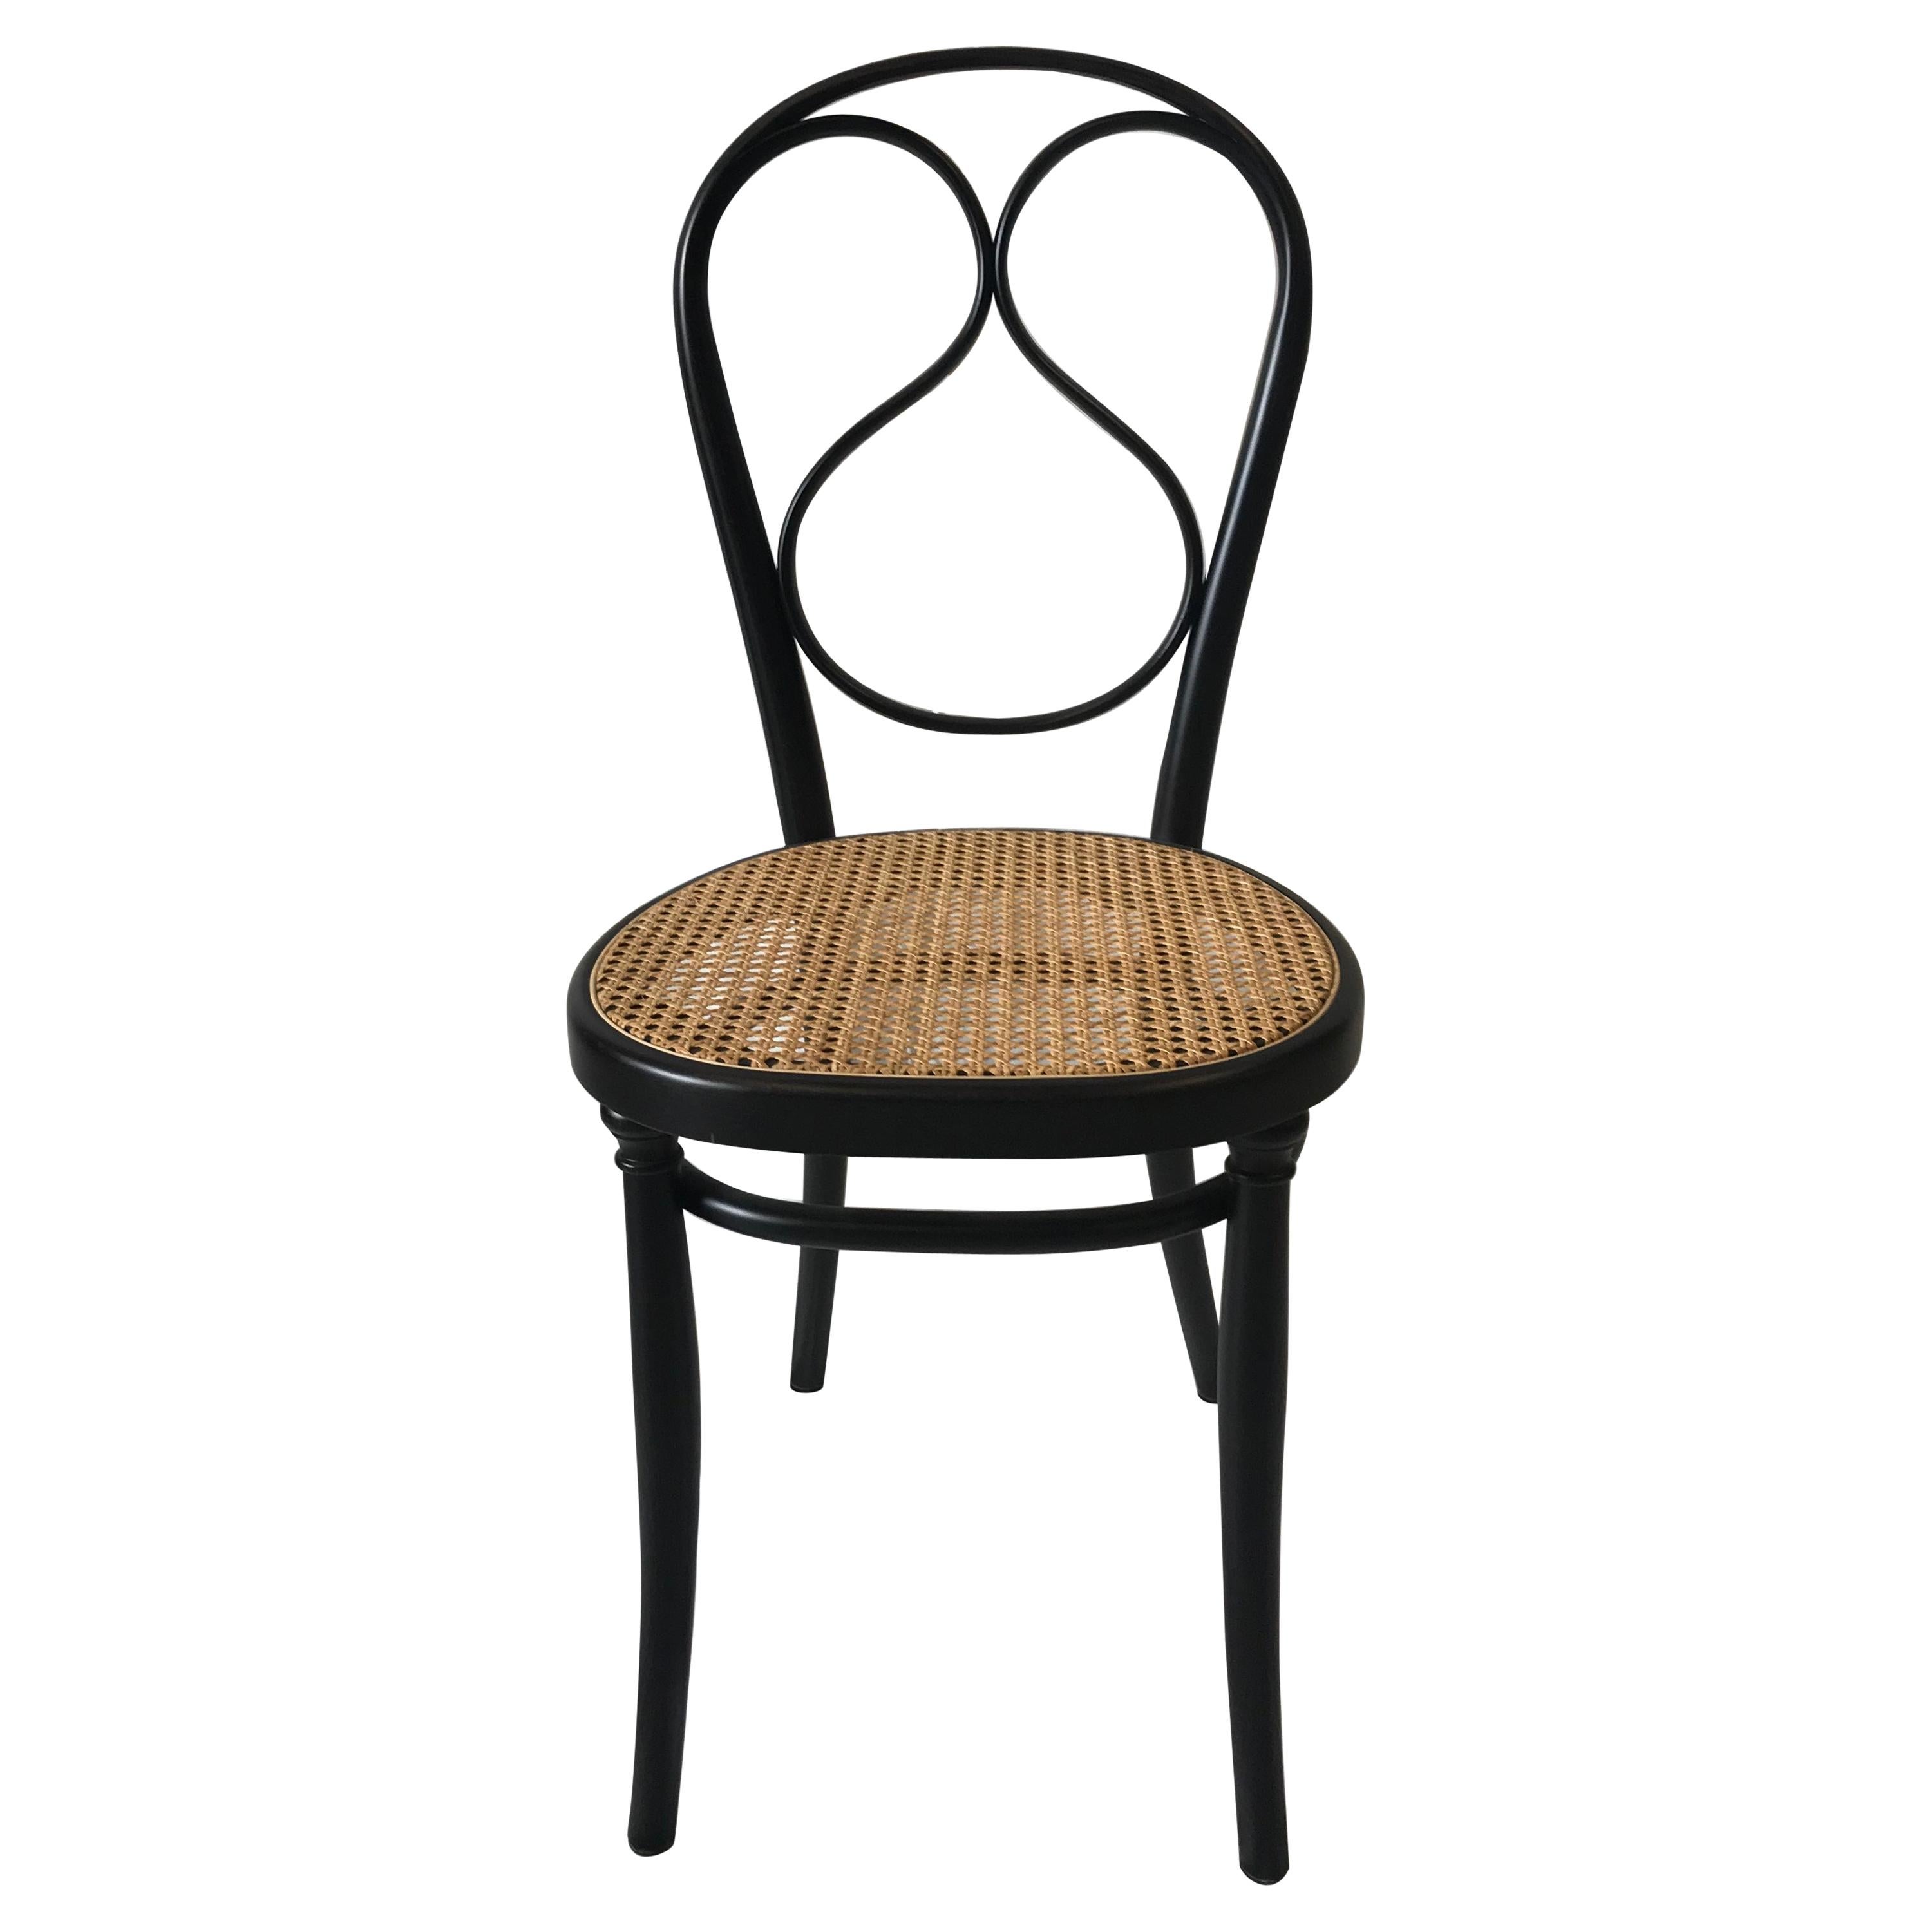 Thonet No. 1 Chair Woven Cane Seat Wenge Stained Beechwood Frame